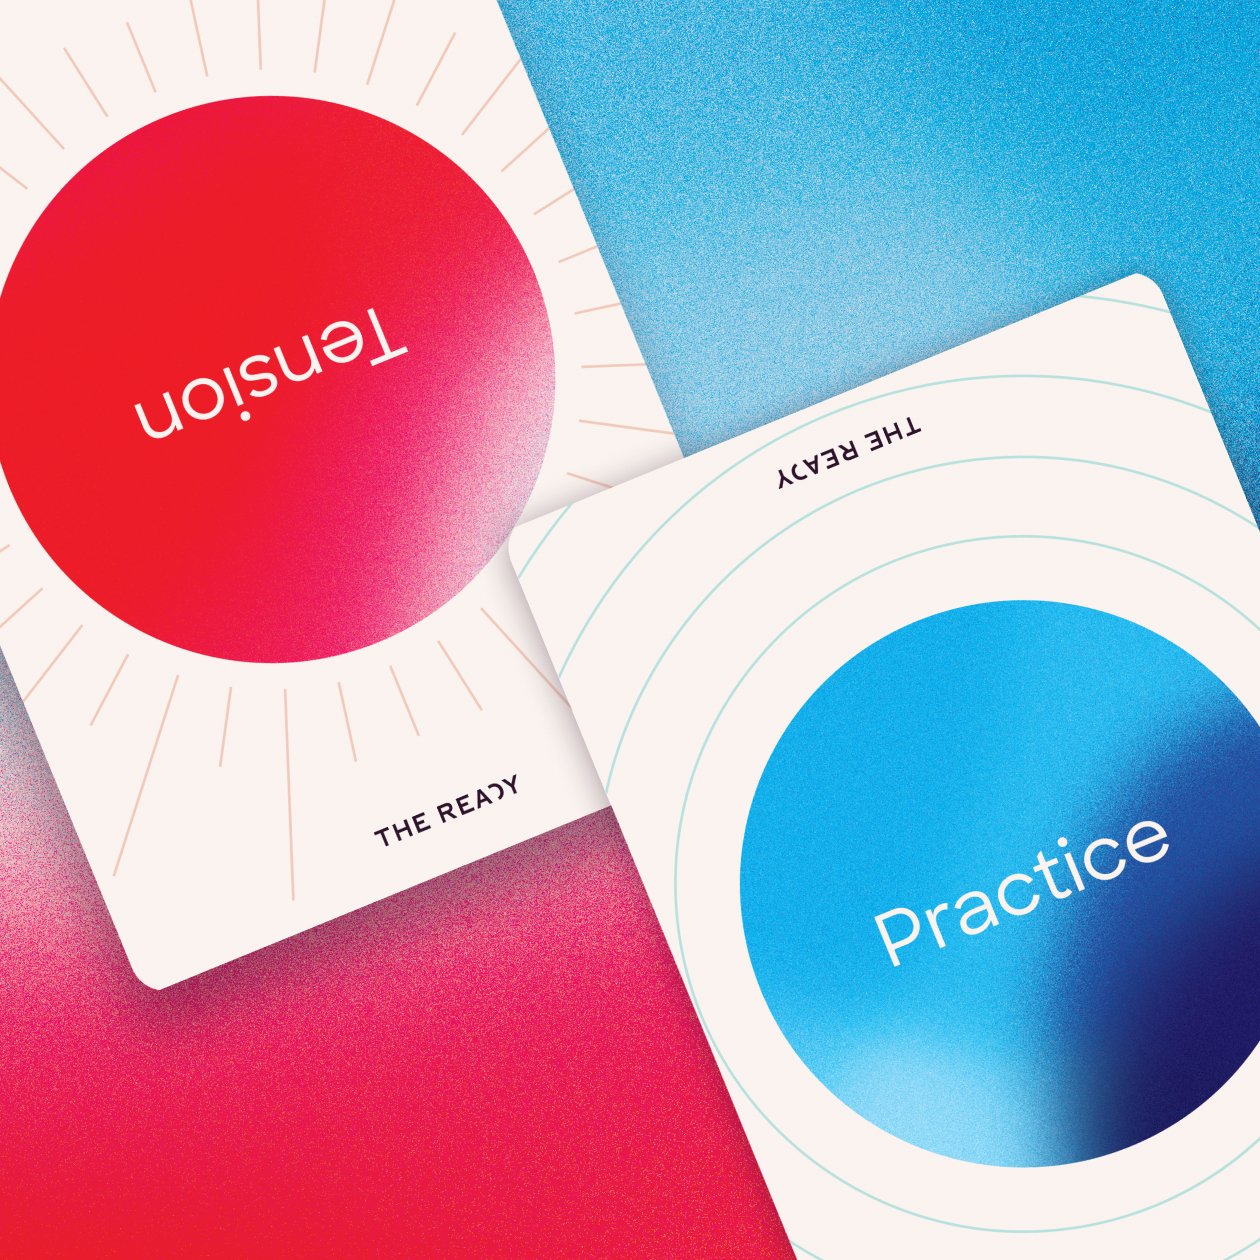 The Ready — Tension And Practice Cards